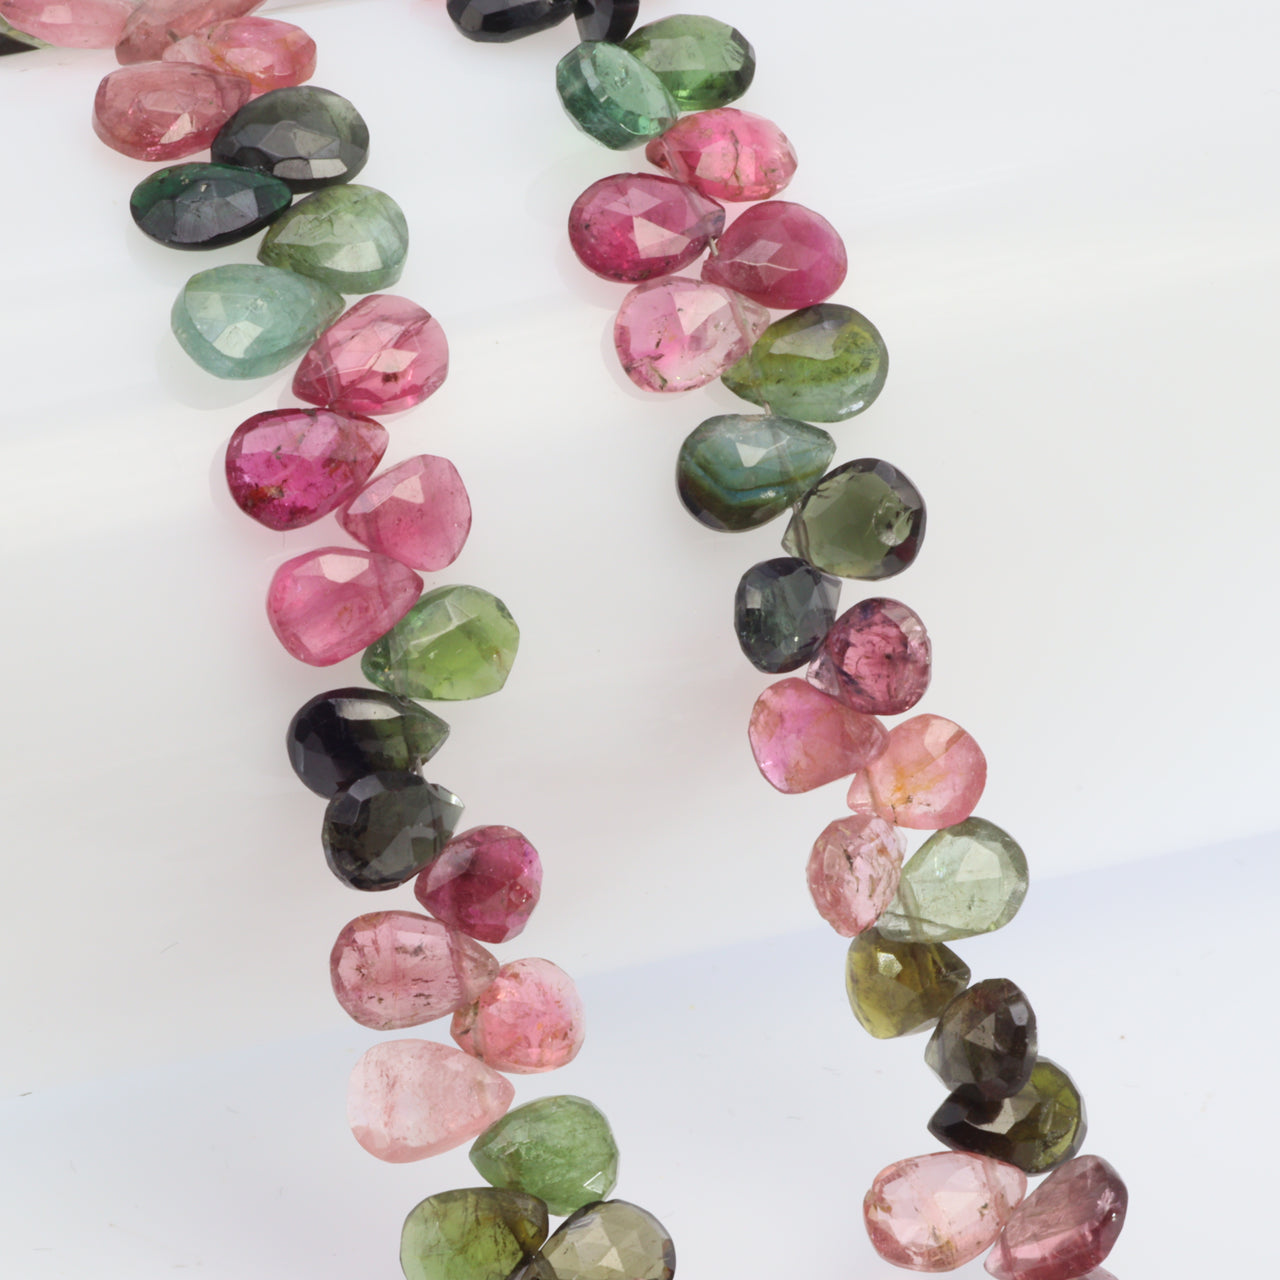 Watermelon Tourmaline 7x5mm Faceted Pear Shaped Briolettes